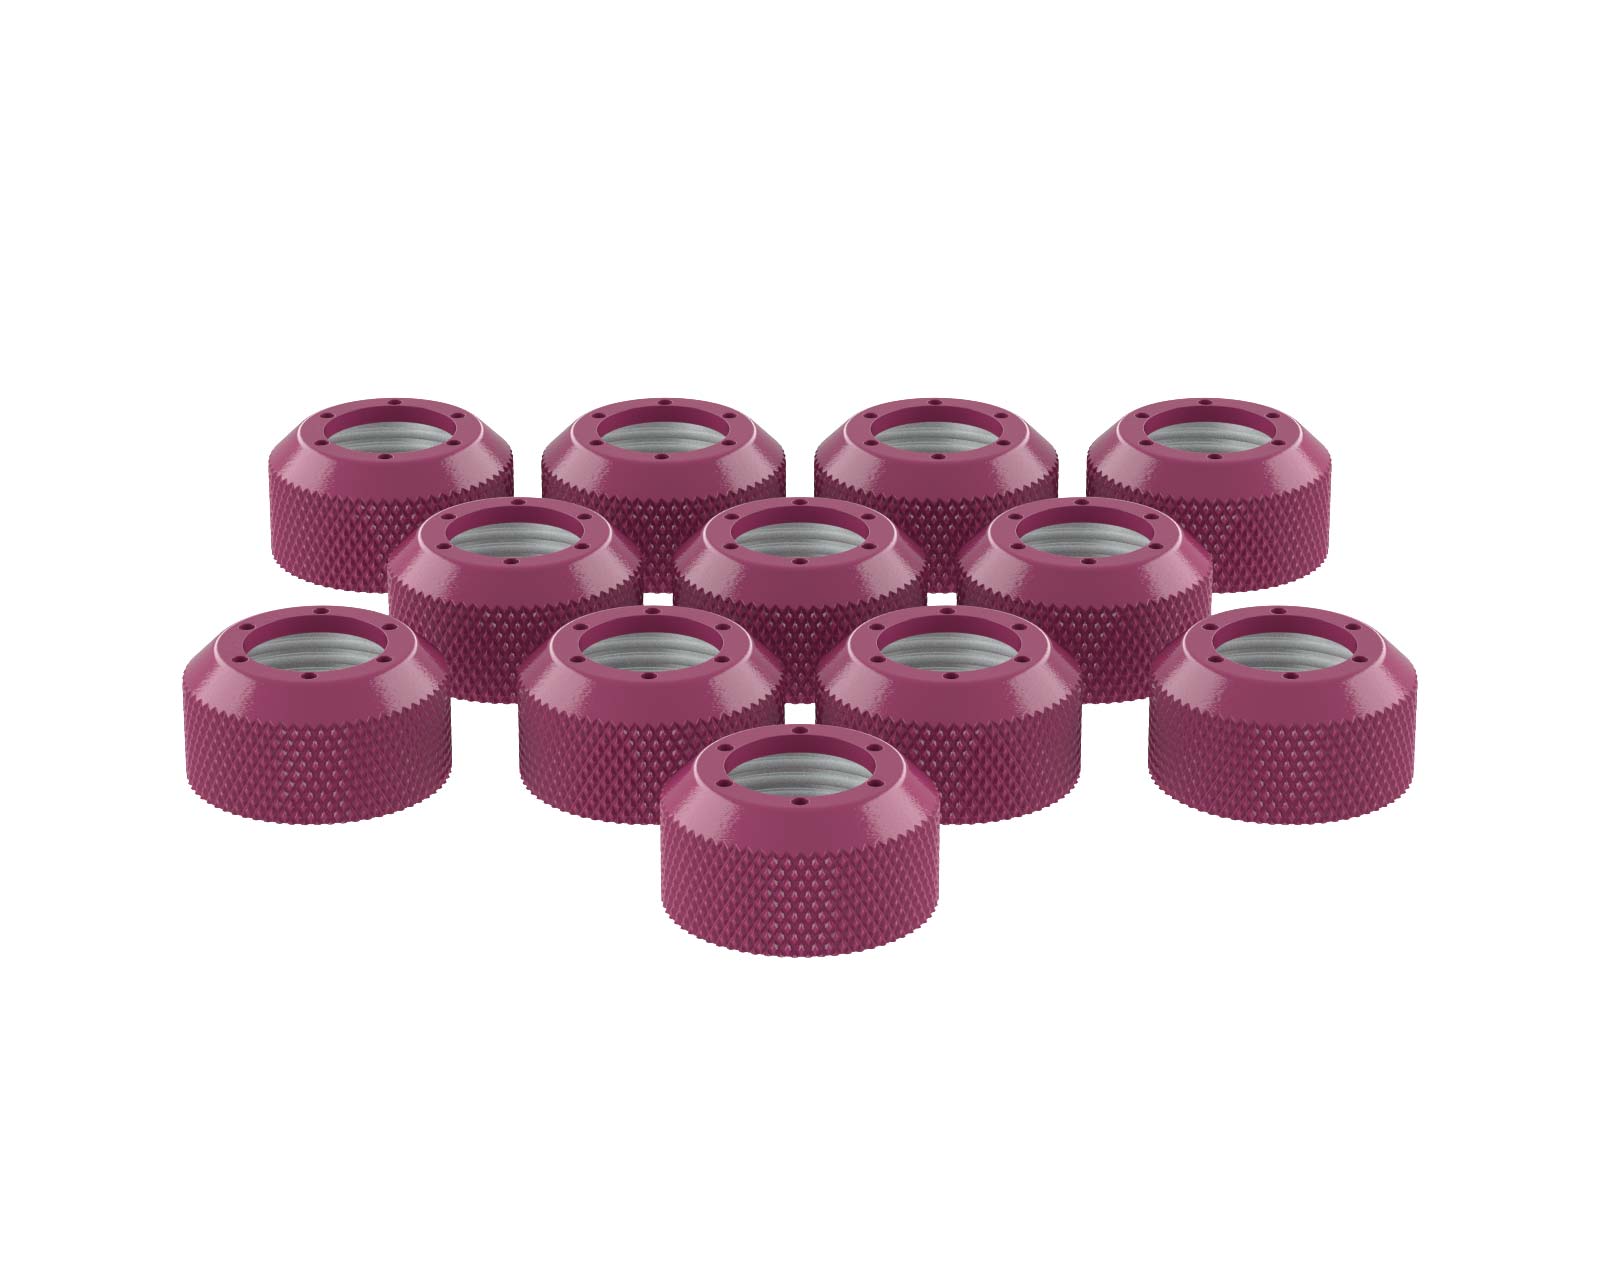 PrimoChill RSX Replacement Cap Switch Over Kit - 1/2in. - PrimoChill - KEEPING IT COOL Magenta